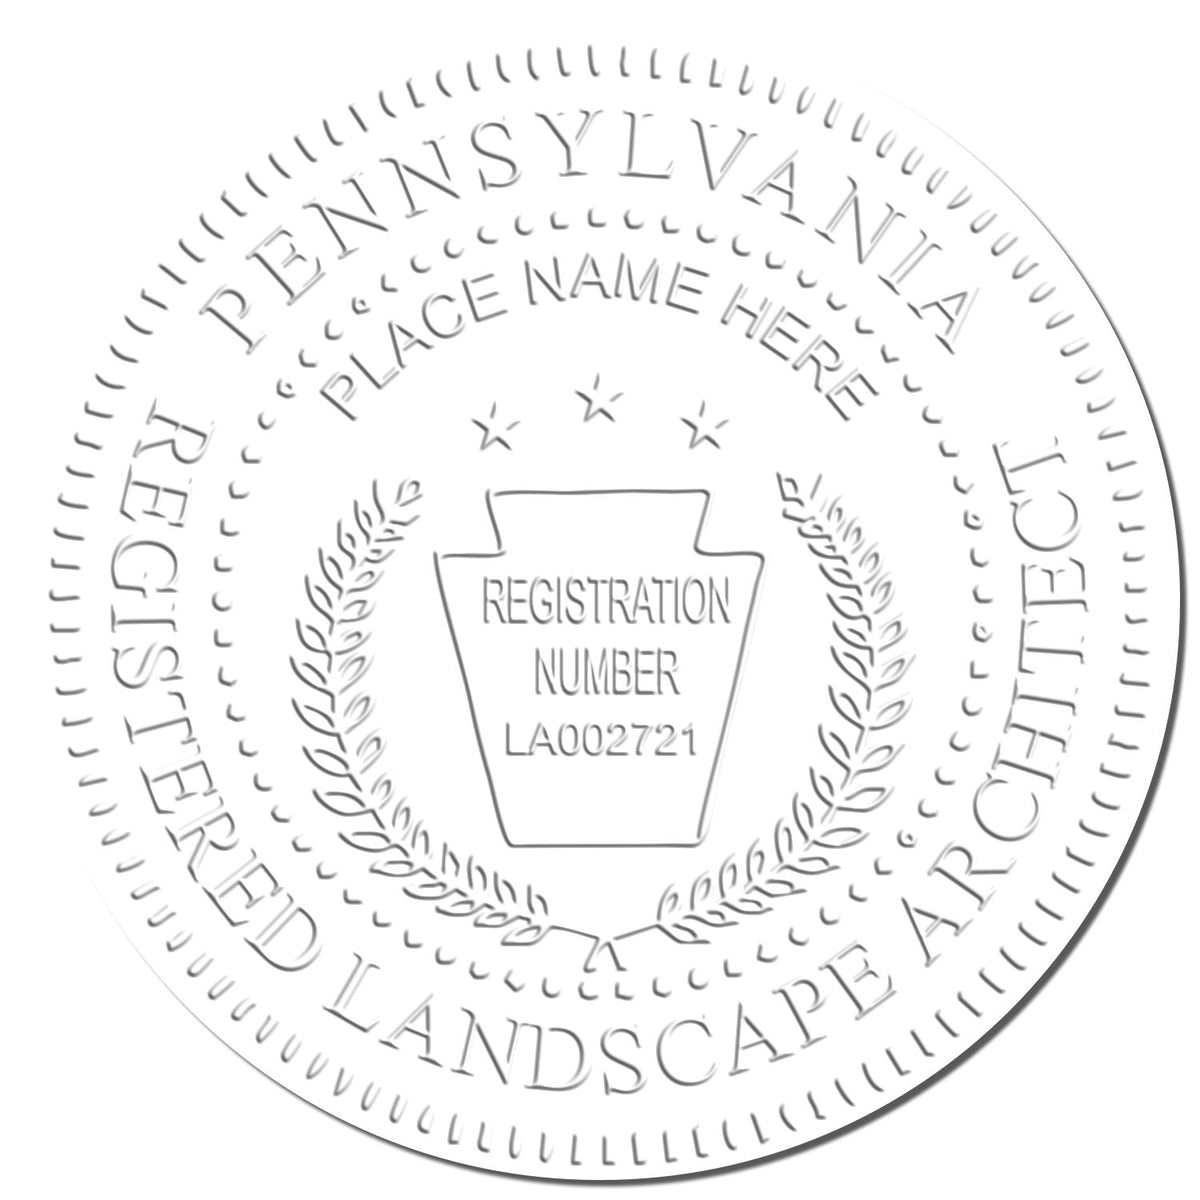 This paper is stamped with a sample imprint of the Gift Pennsylvania Landscape Architect Seal, signifying its quality and reliability.